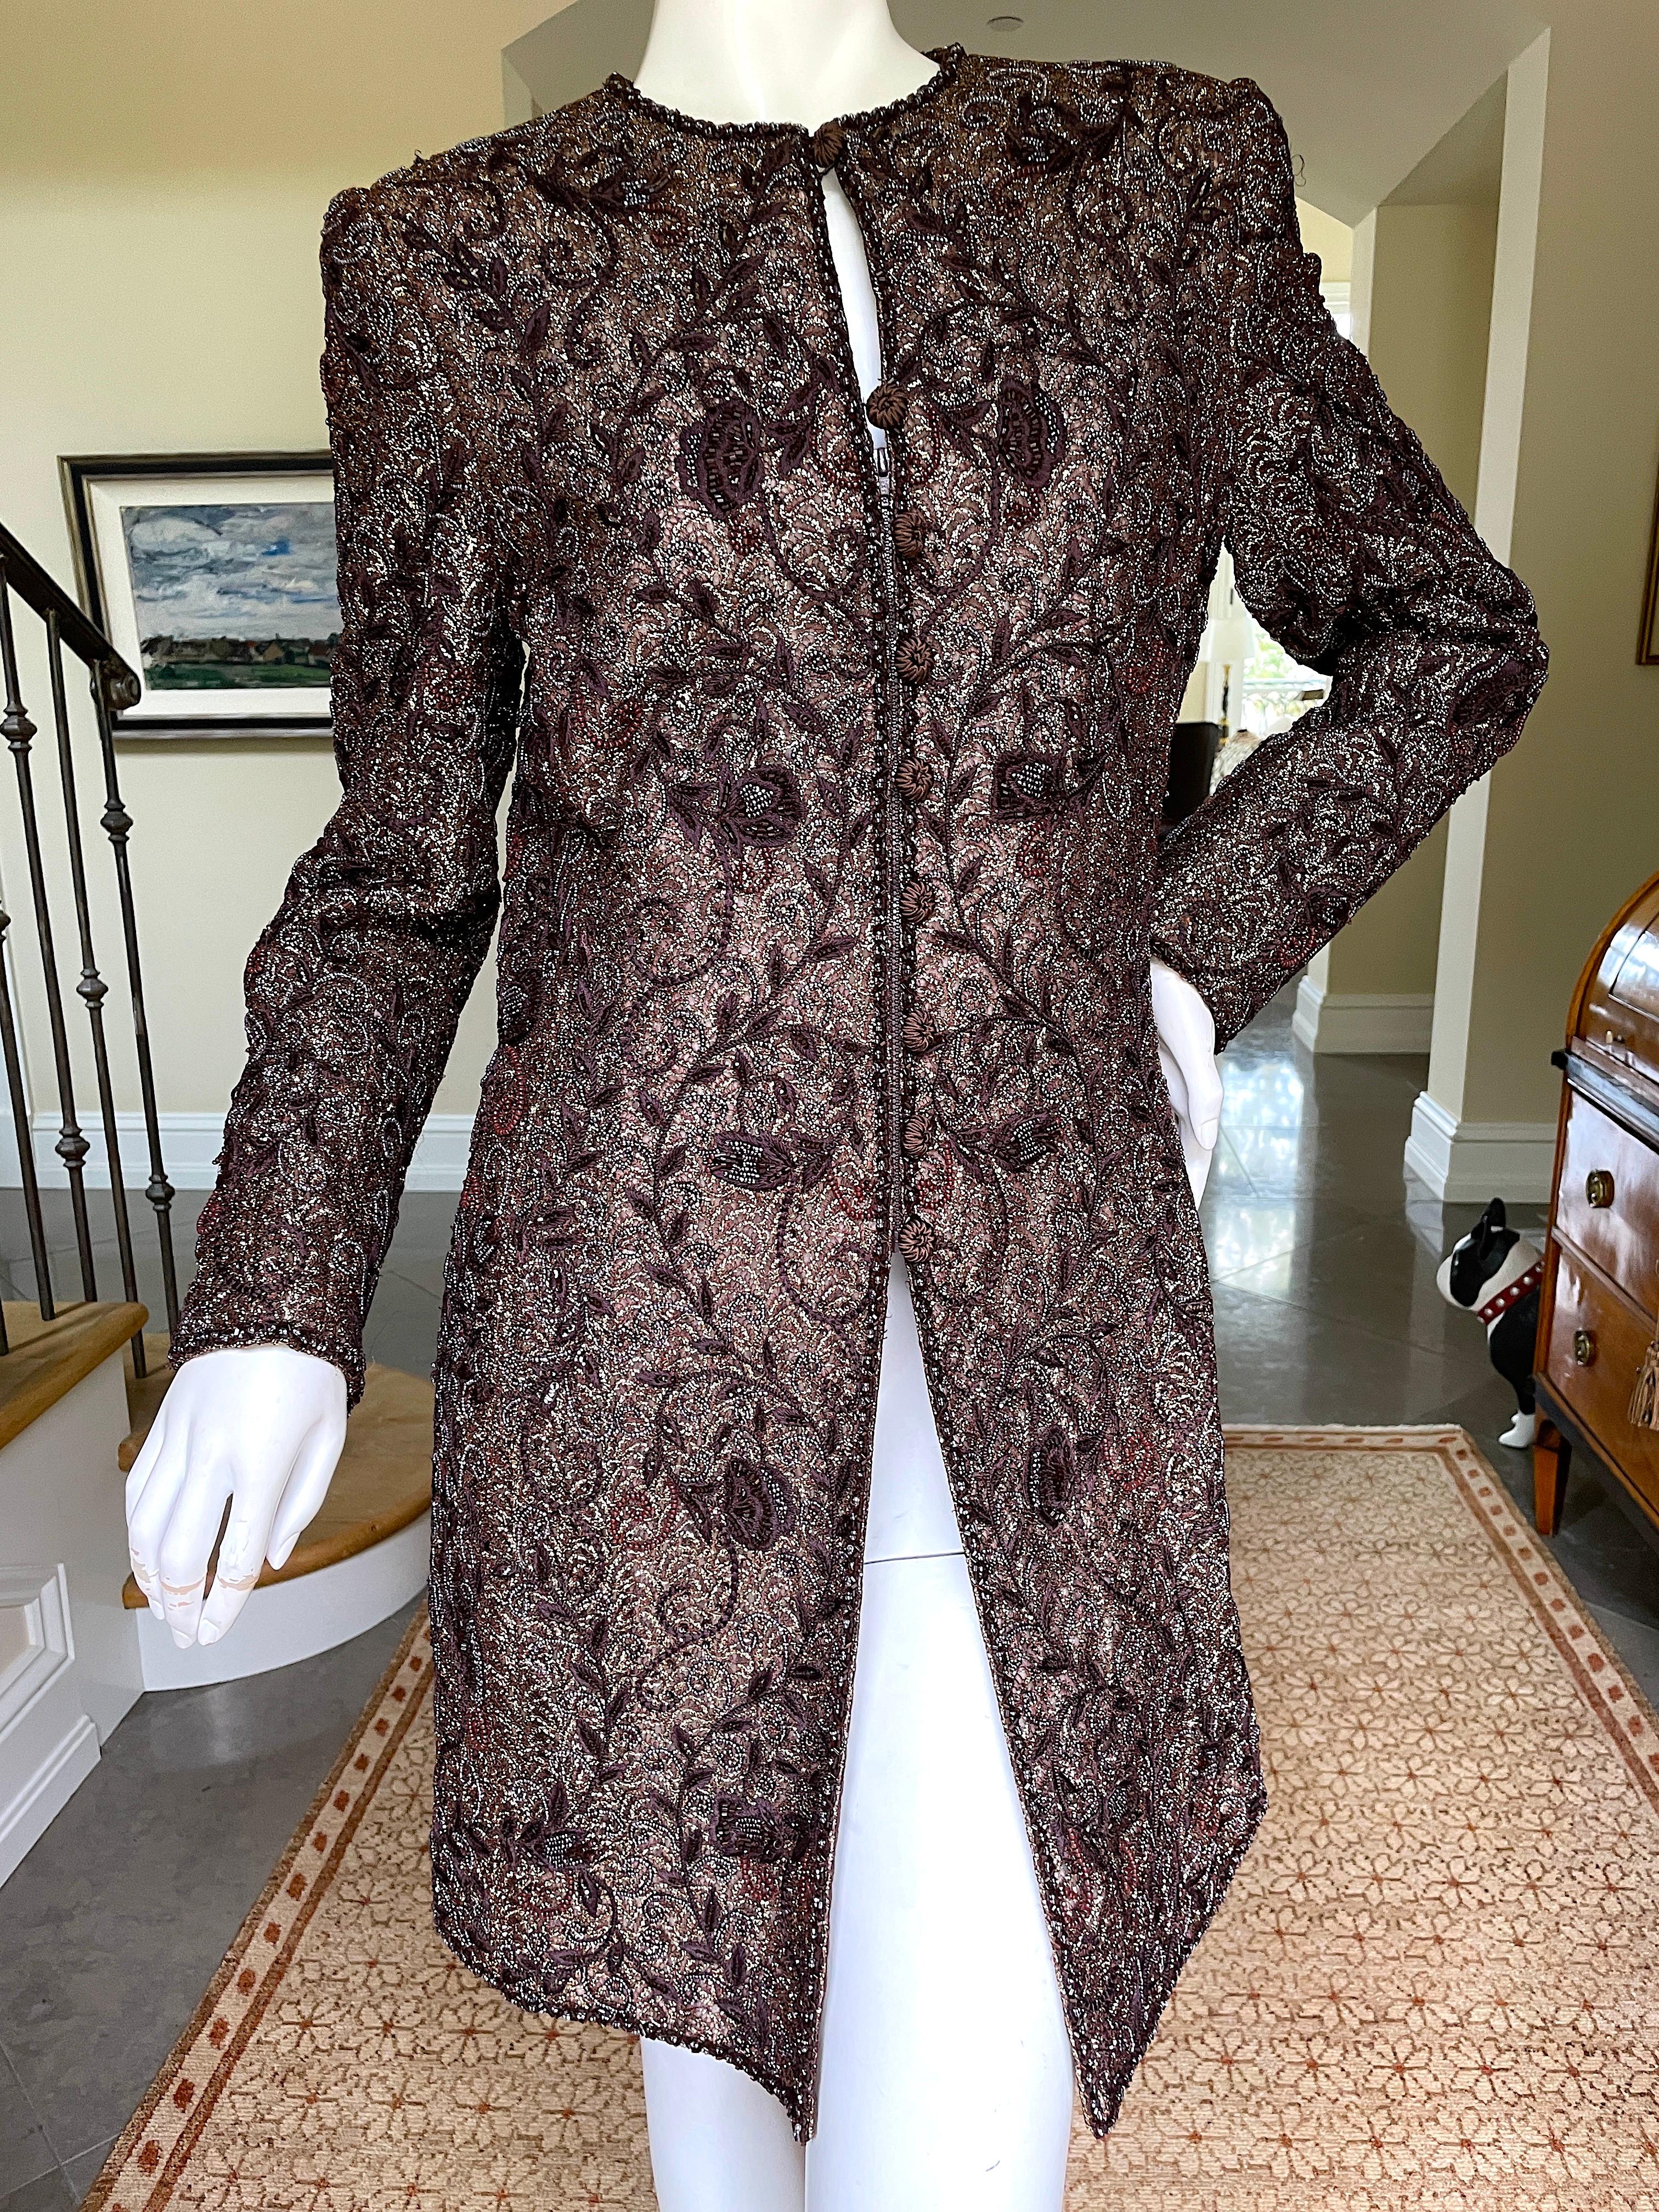 Oscar de la Renta Exquisite Vintage Embellished Evening Coat
 Simply Stunning. Please use the zoom feature to see all the remarkable details.
Perfect for Holiday entertaining.
 Size 8 vintage is like size 6 today
  Bust 36